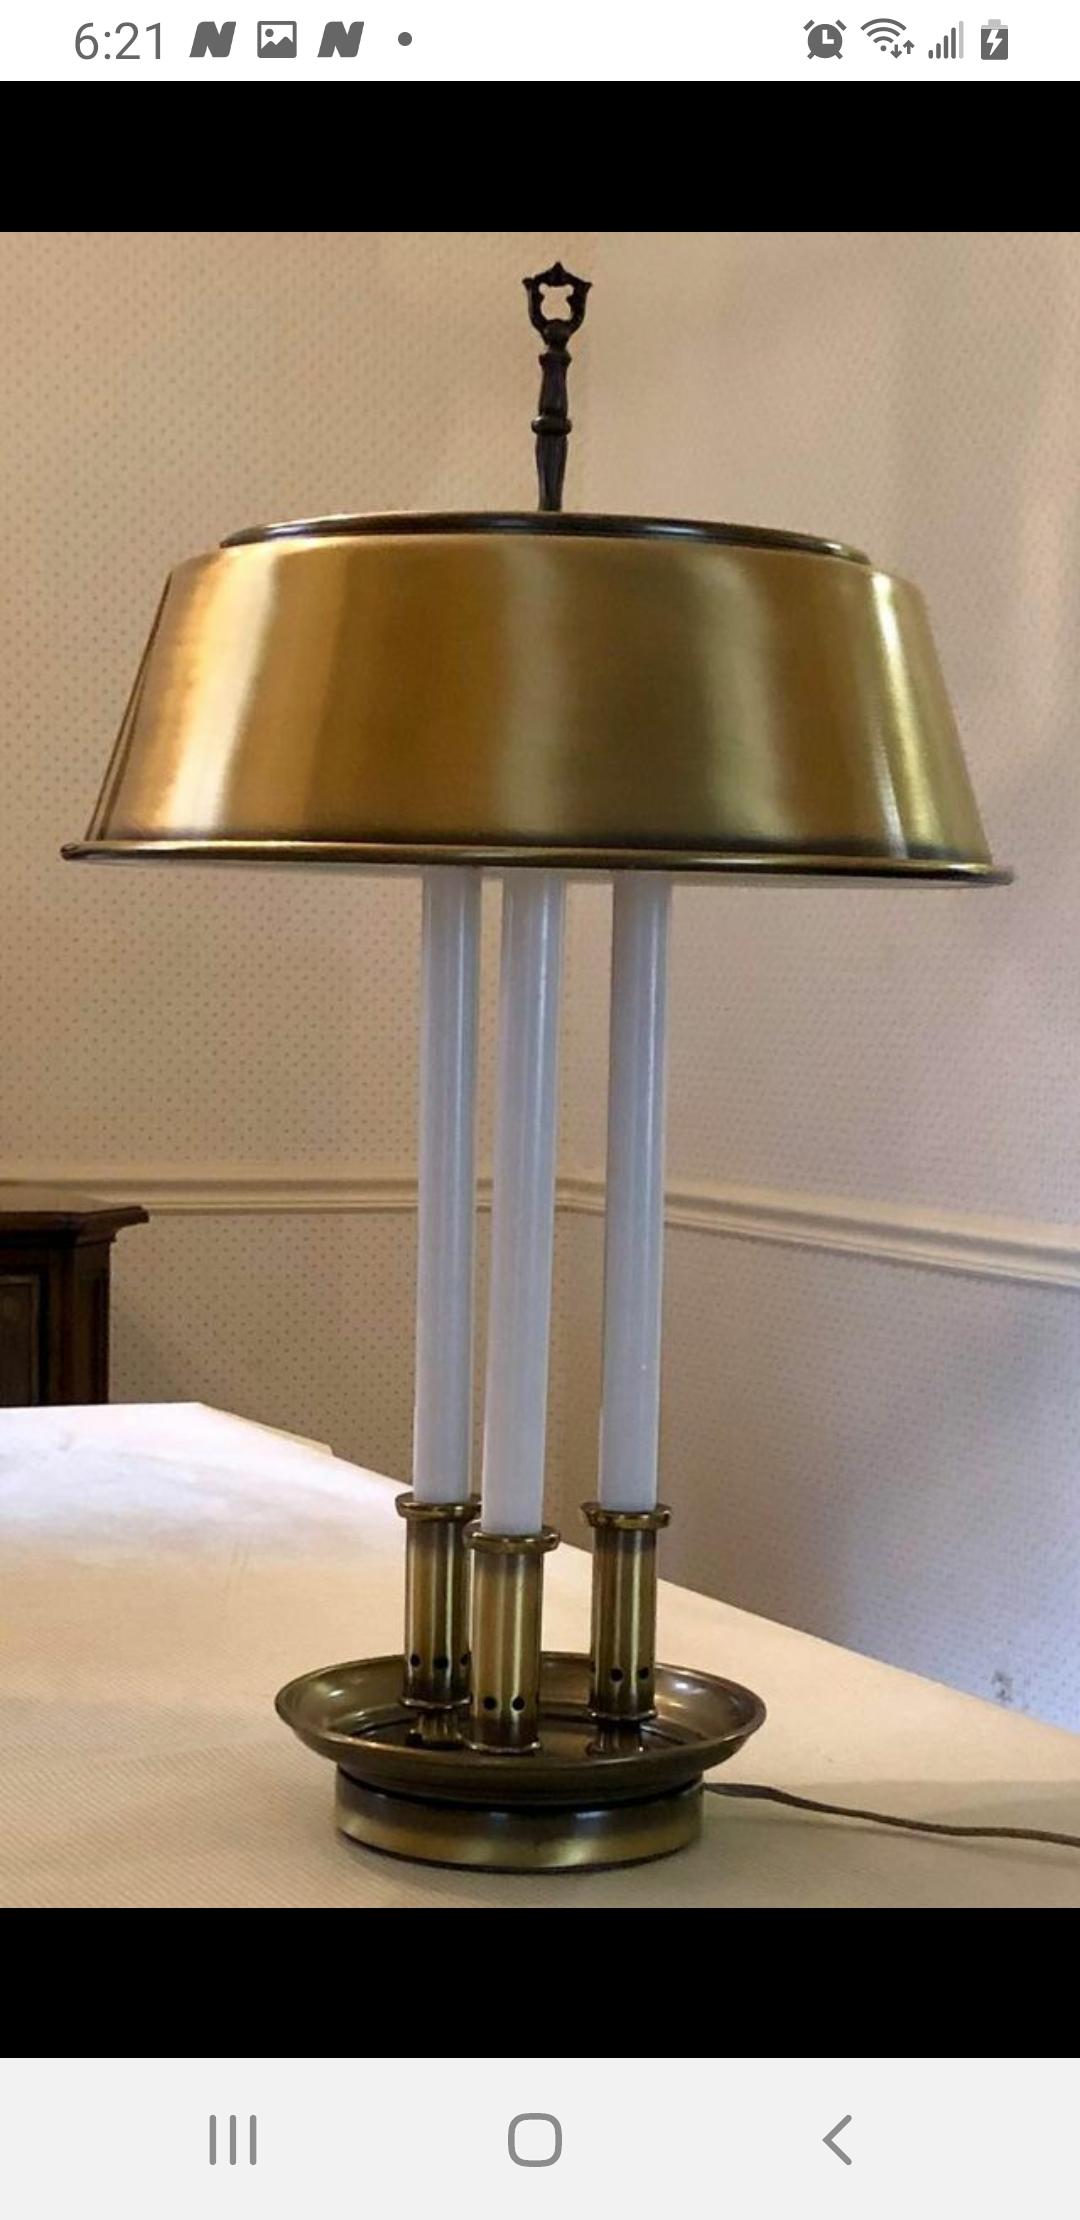 Vintage French game table style, bouilotte style desk lamp. 23 inches tall this antique or burnished brass desk lamp has a 6 inch base holding up 3 tall faux candles, the actual light comes from a double cluster at the top of the central stem . the